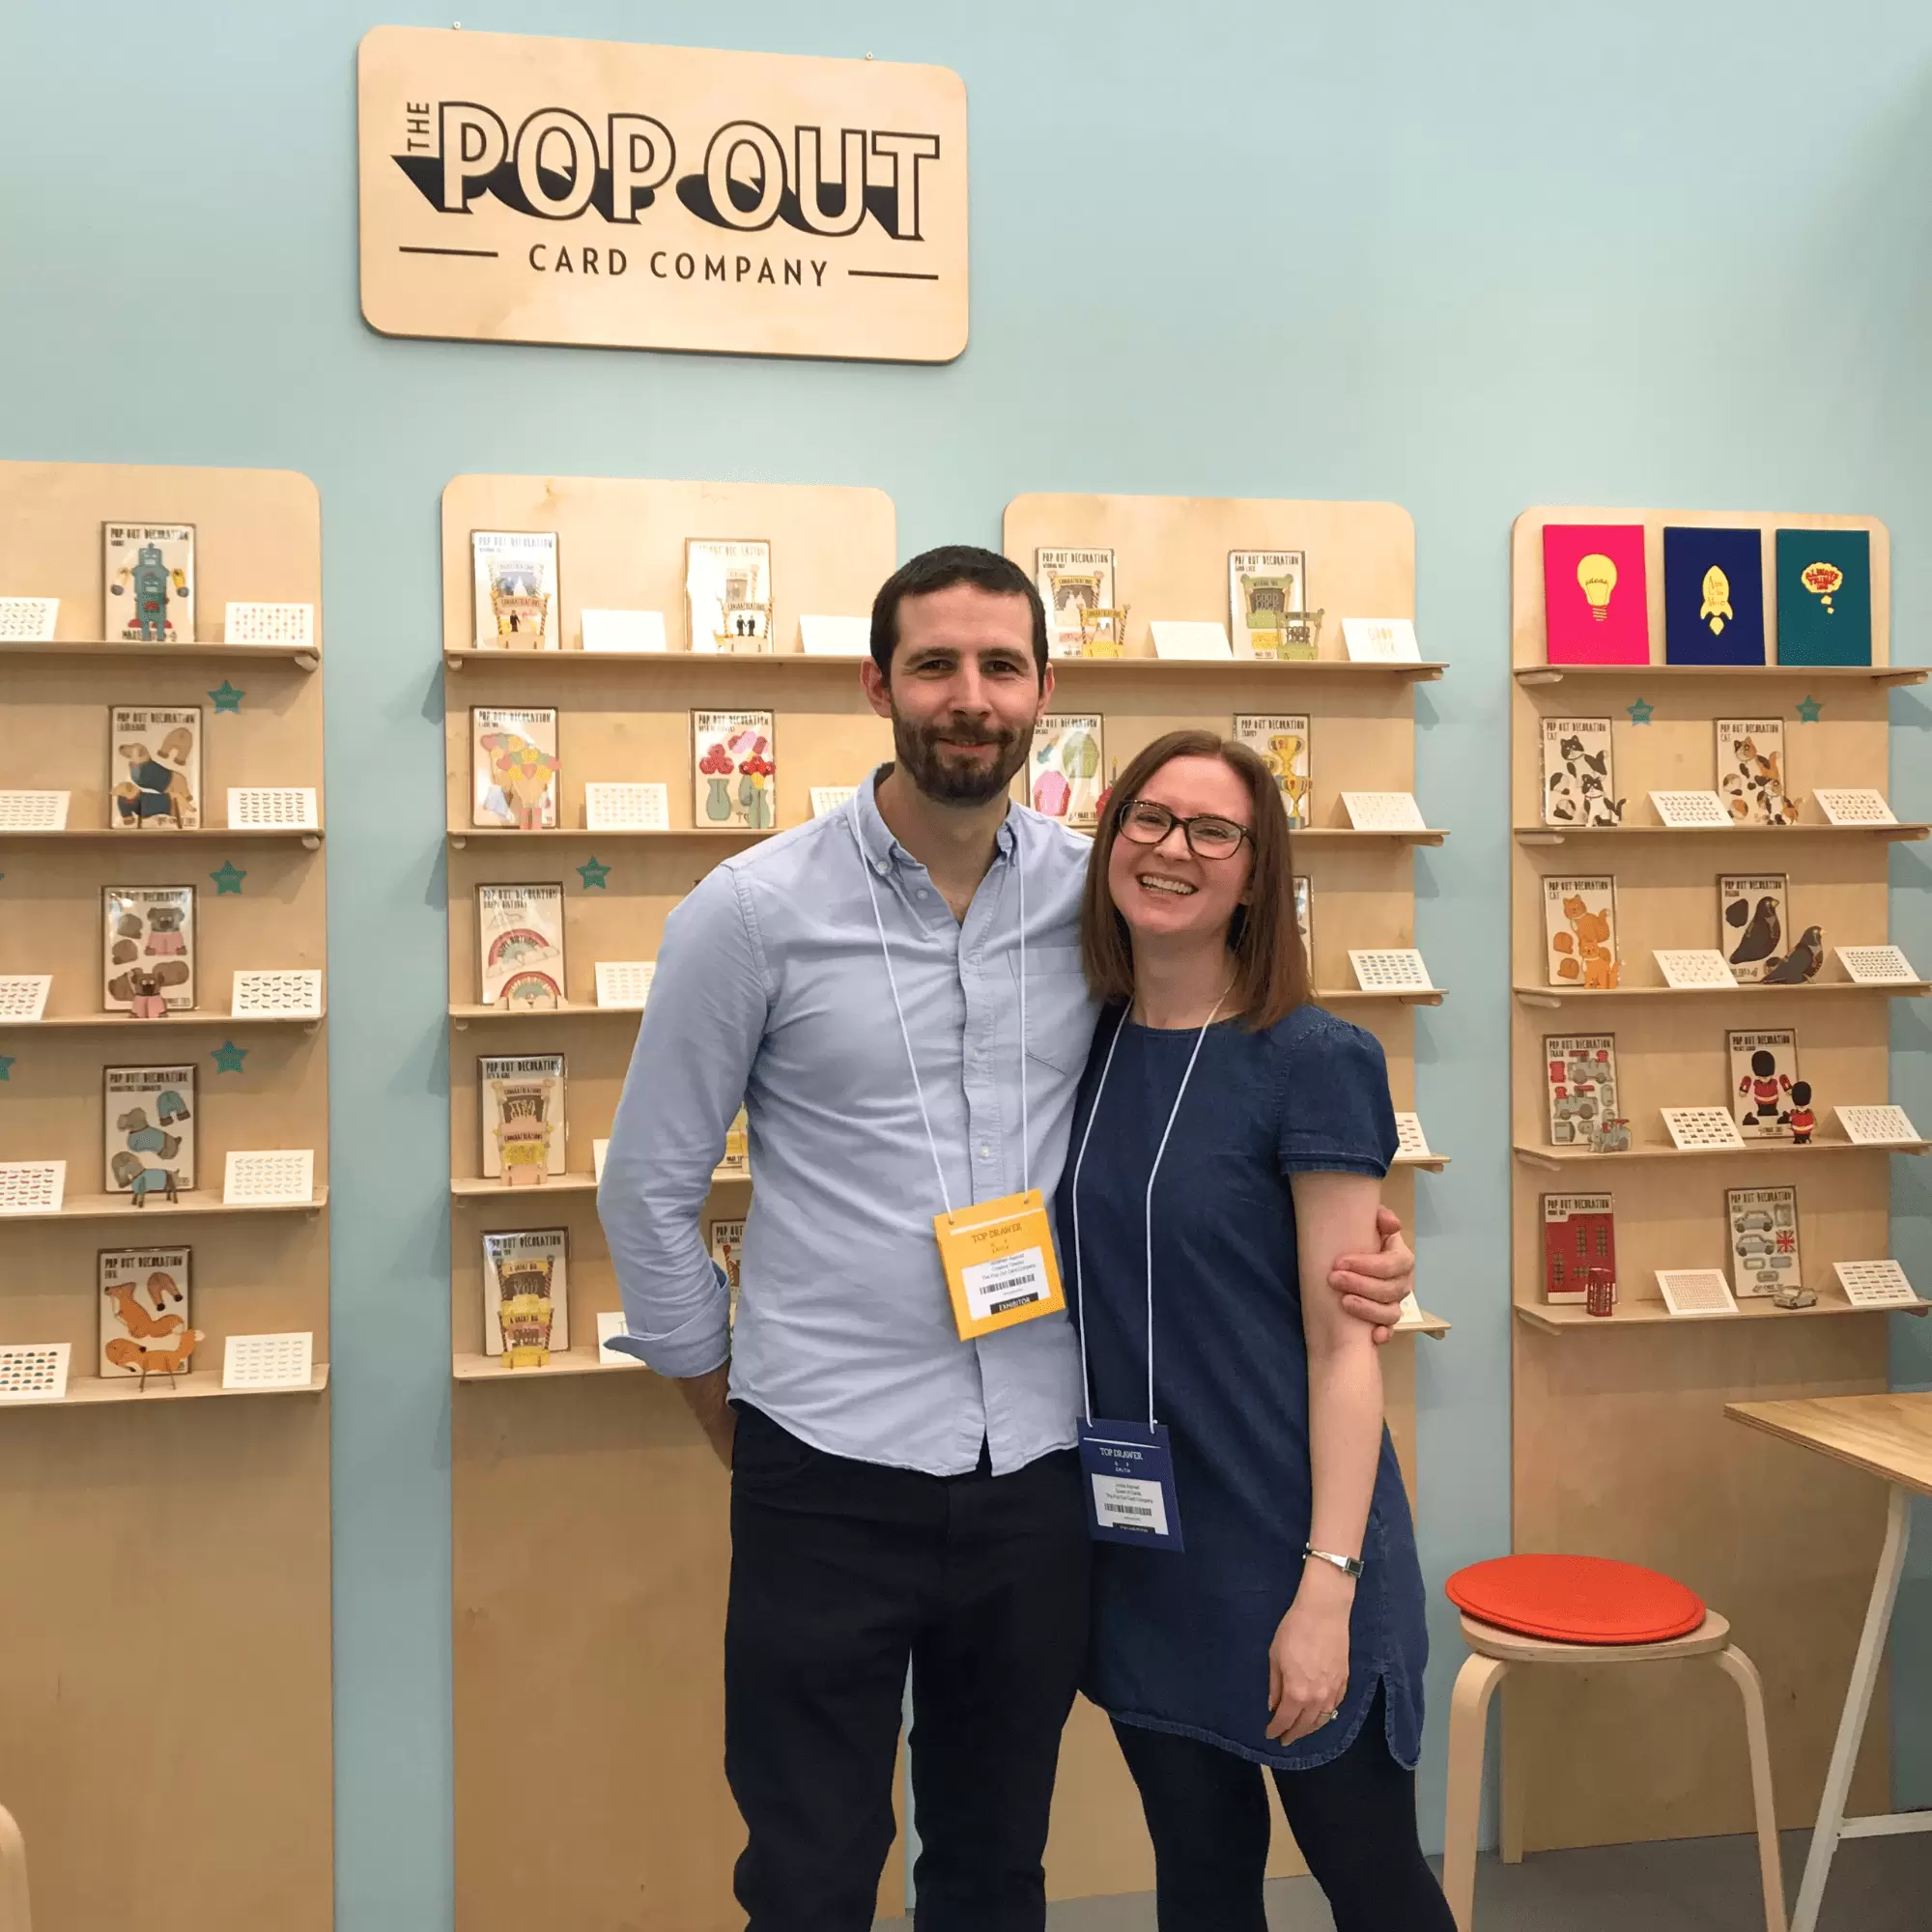 Jonathan and Louisa Aspinall of The Pop Out Card Company hugging and standing in front of their 3D laser cut pop out cards on display at a trade show